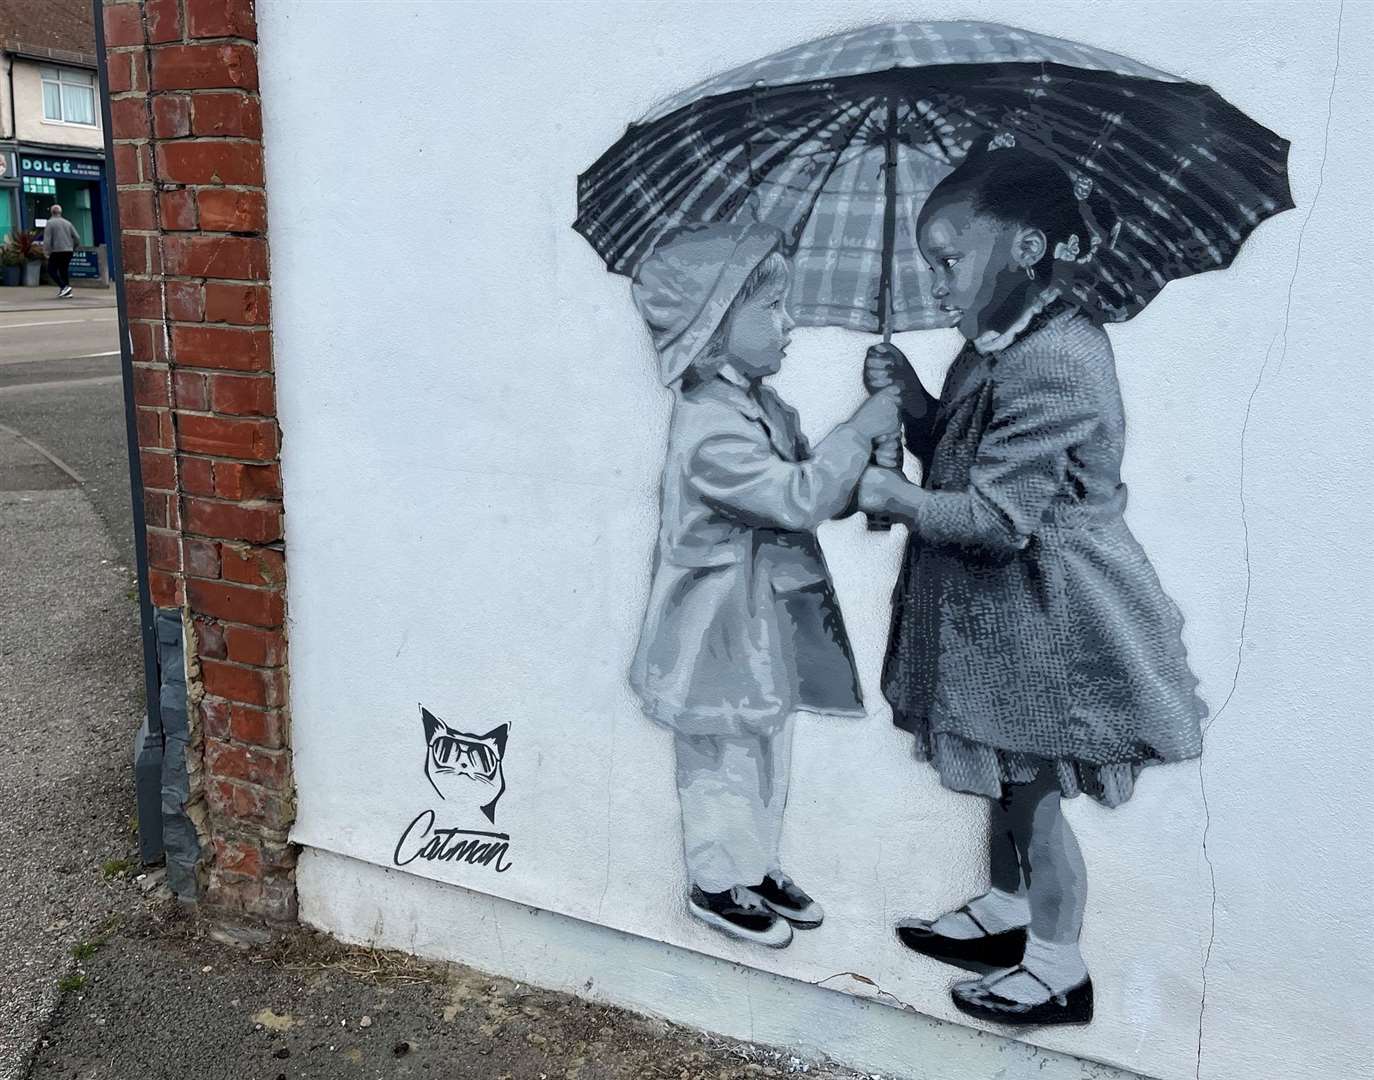 Catman's latest street art on the side of Brown's Flooring shop in Whitstable